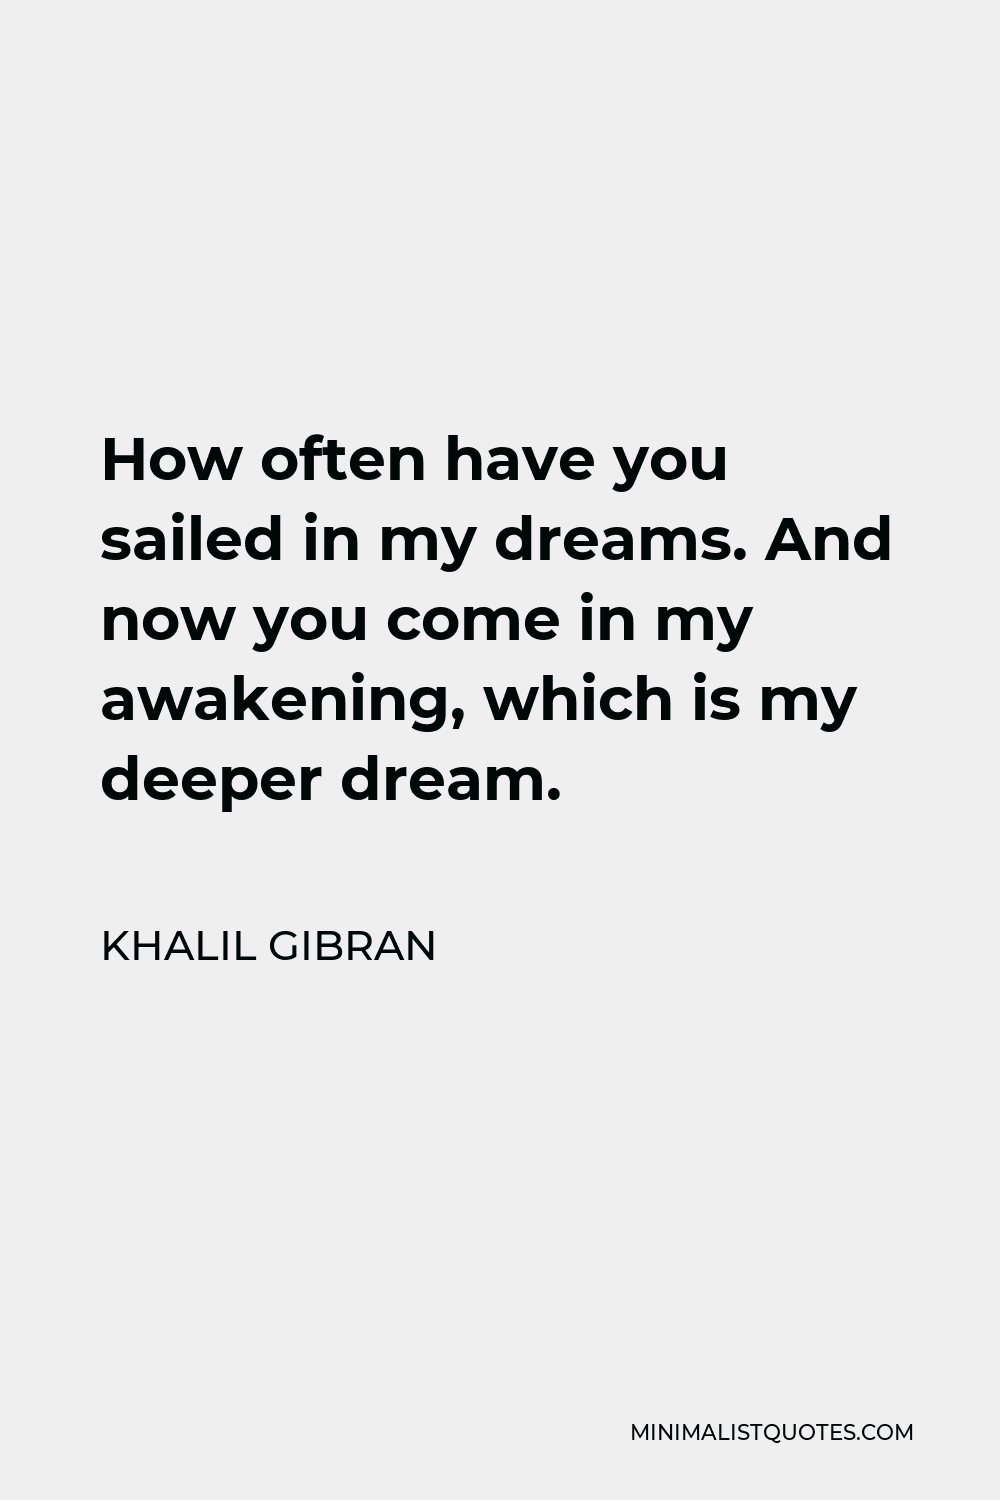 Khalil Gibran Quote - How often have you sailed in my dreams. And now you come in my awakening, which is my deeper dream.